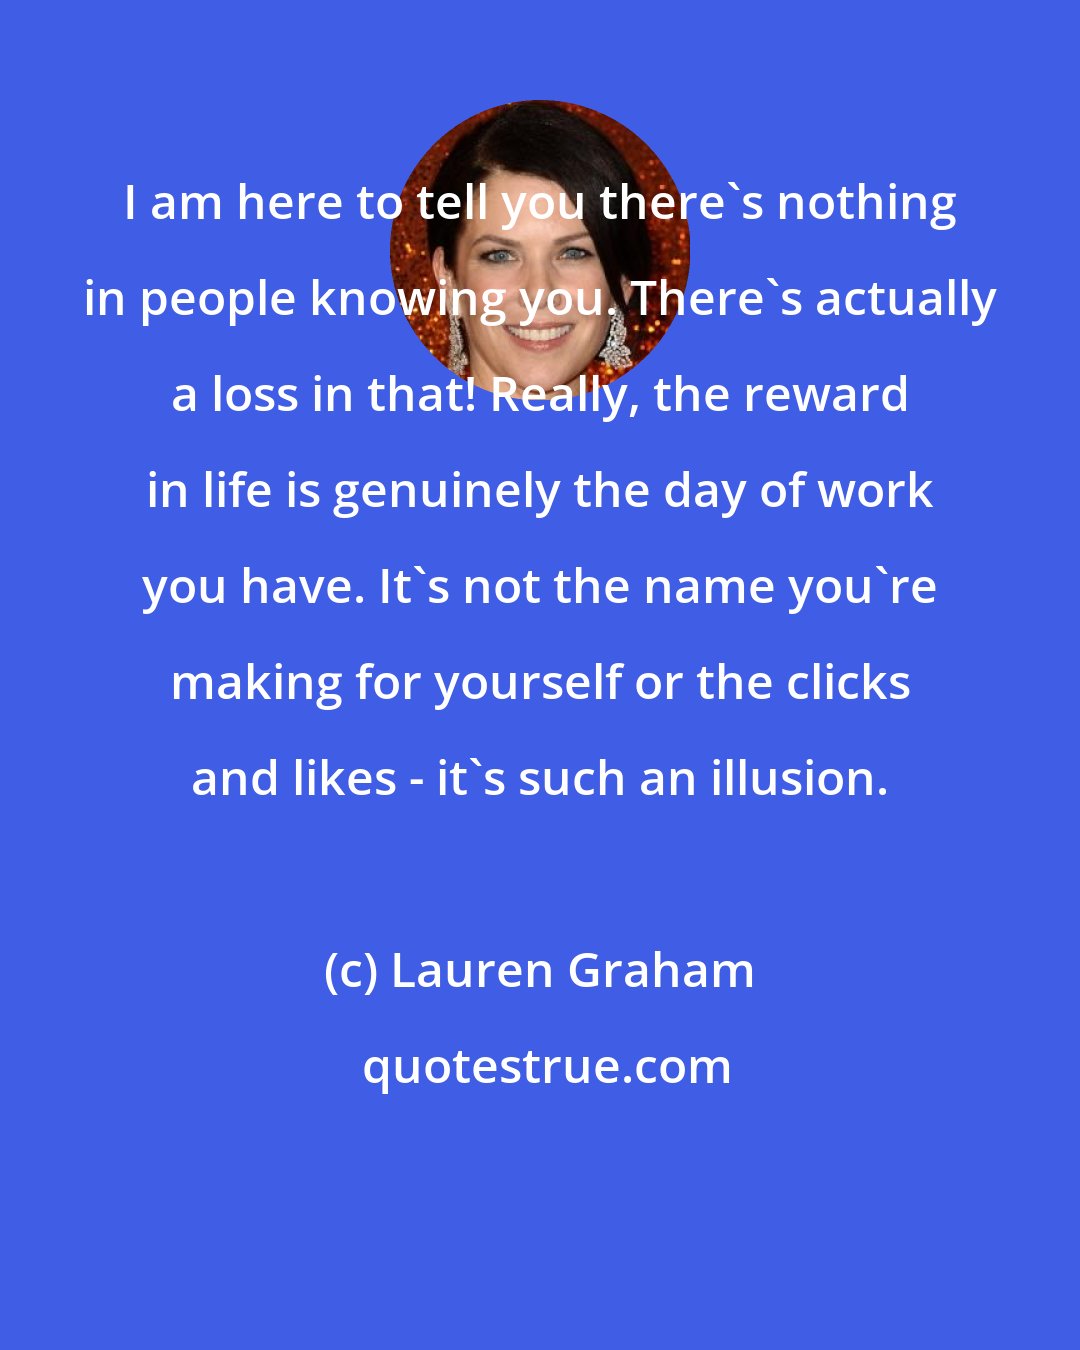 Lauren Graham: I am here to tell you there's nothing in people knowing you. There's actually a loss in that! Really, the reward in life is genuinely the day of work you have. It's not the name you're making for yourself or the clicks and likes - it's such an illusion.